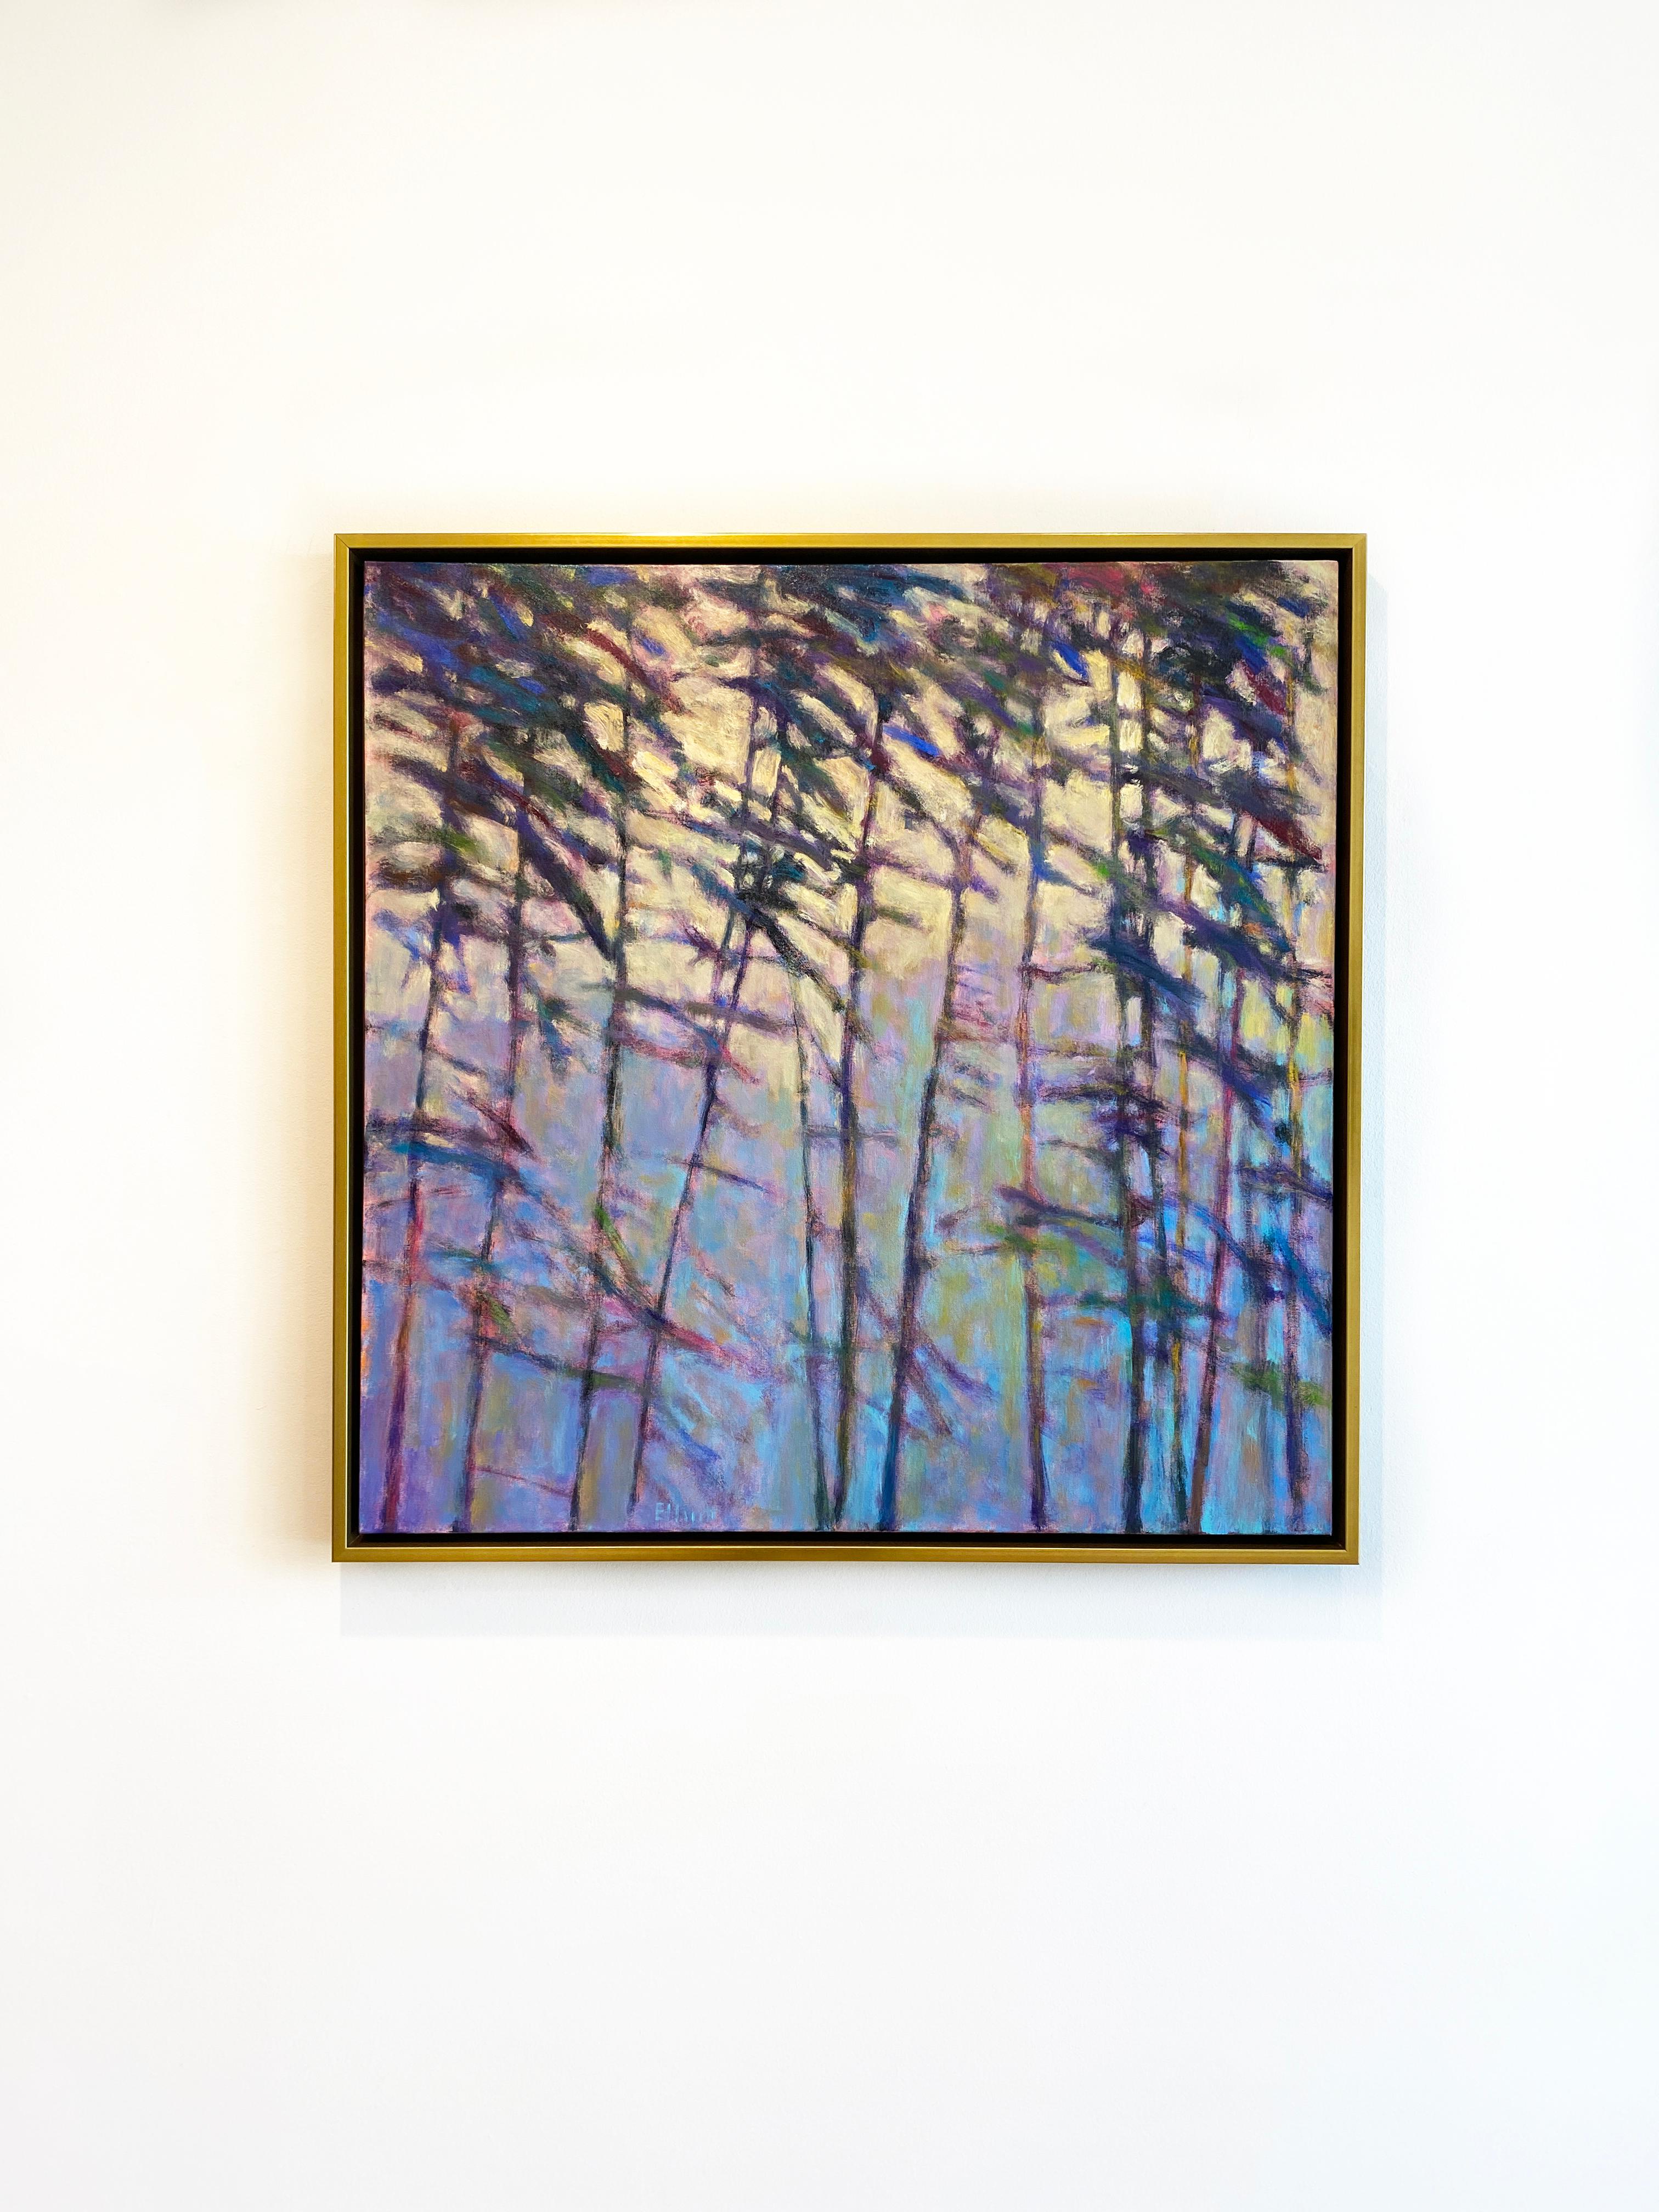 Available at Madelyn Jordon Fine Art. 'Colors in the Breeze IV' 2023 by American artist, Ken Elliott. Oil on canvas, 36 x 36 in. / Frame: 37.75 x 37.75 in. This painting of a forest incorporates a palette of colors in green, purple, yellow, pink,